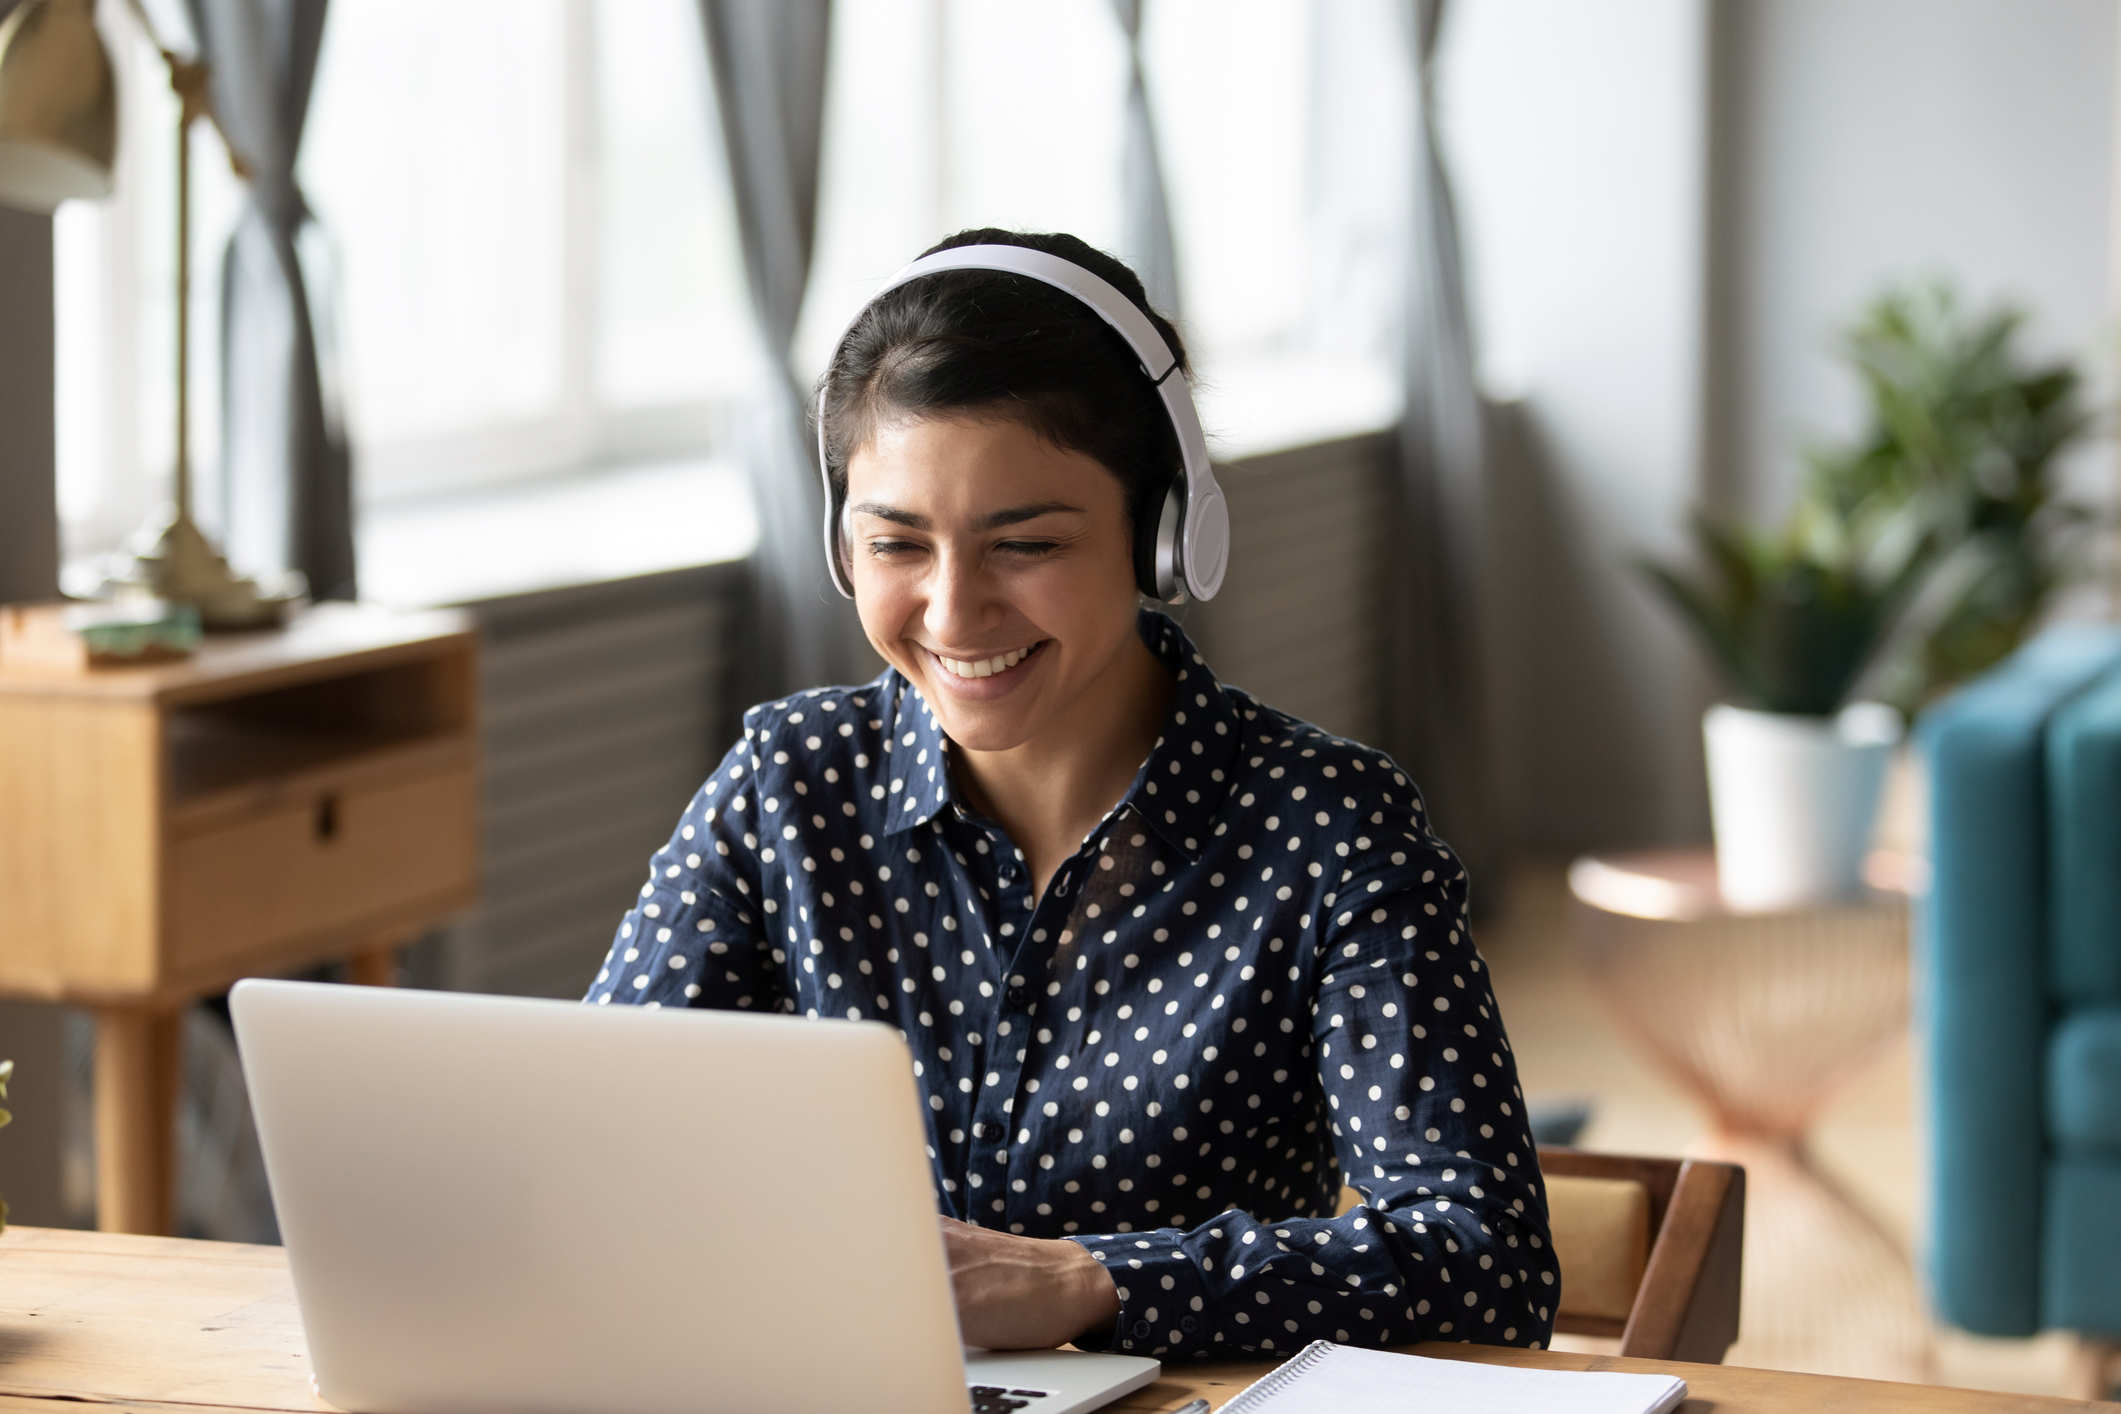 Image of a female person wearing headphones and smiling as she uses a laptop